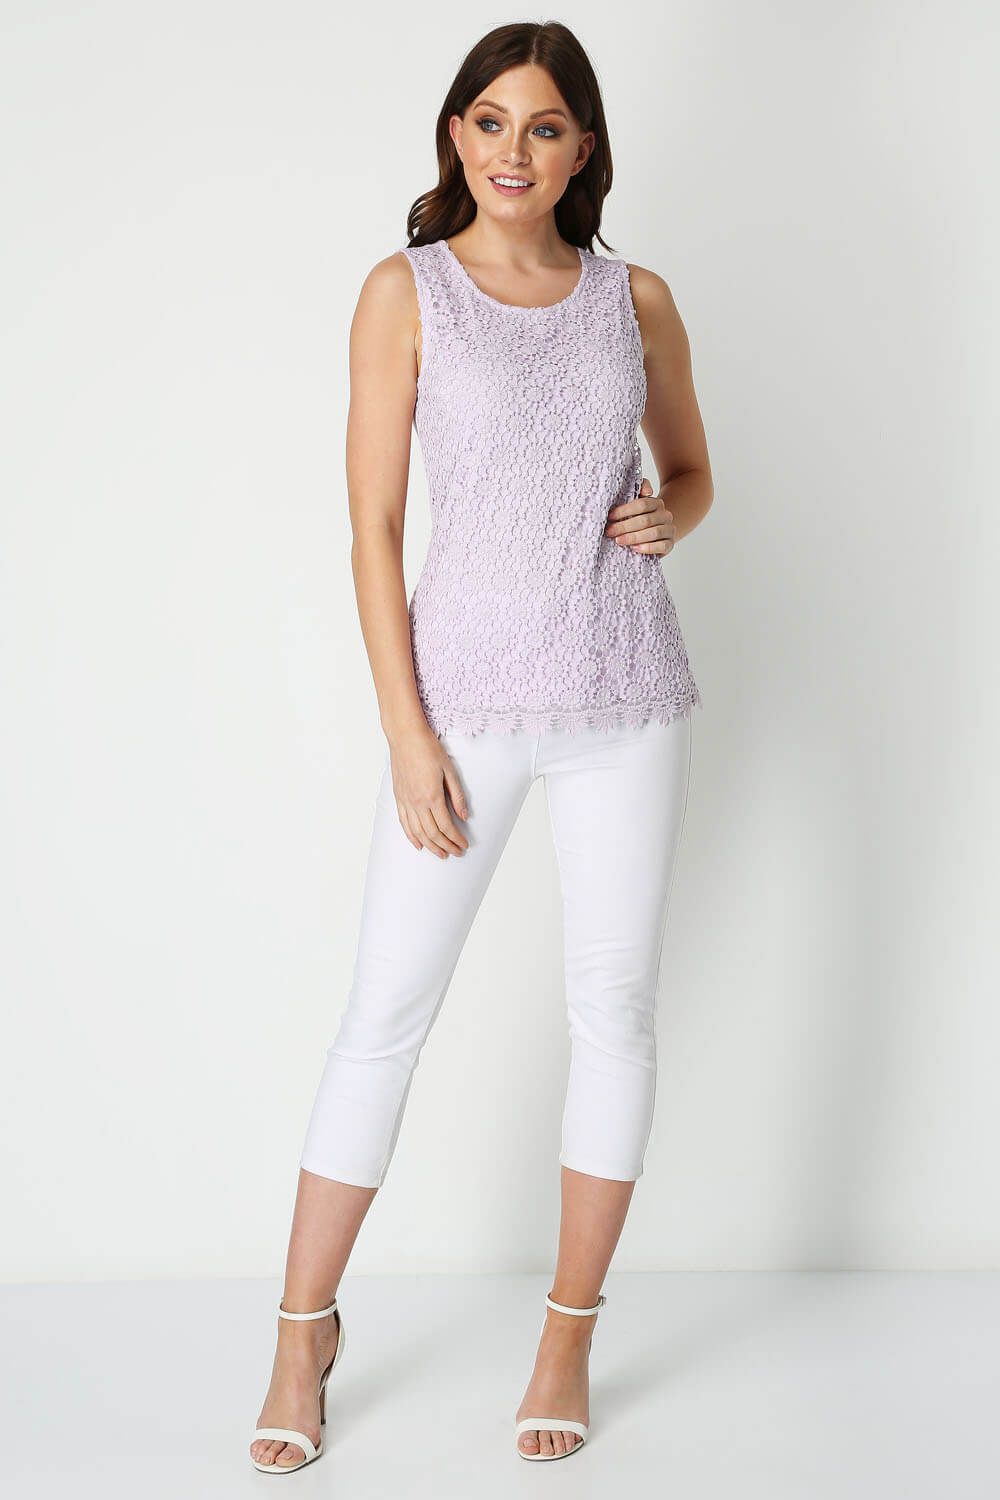 Lilac Lace Front Jersey Vest Top, Image 2 of 8